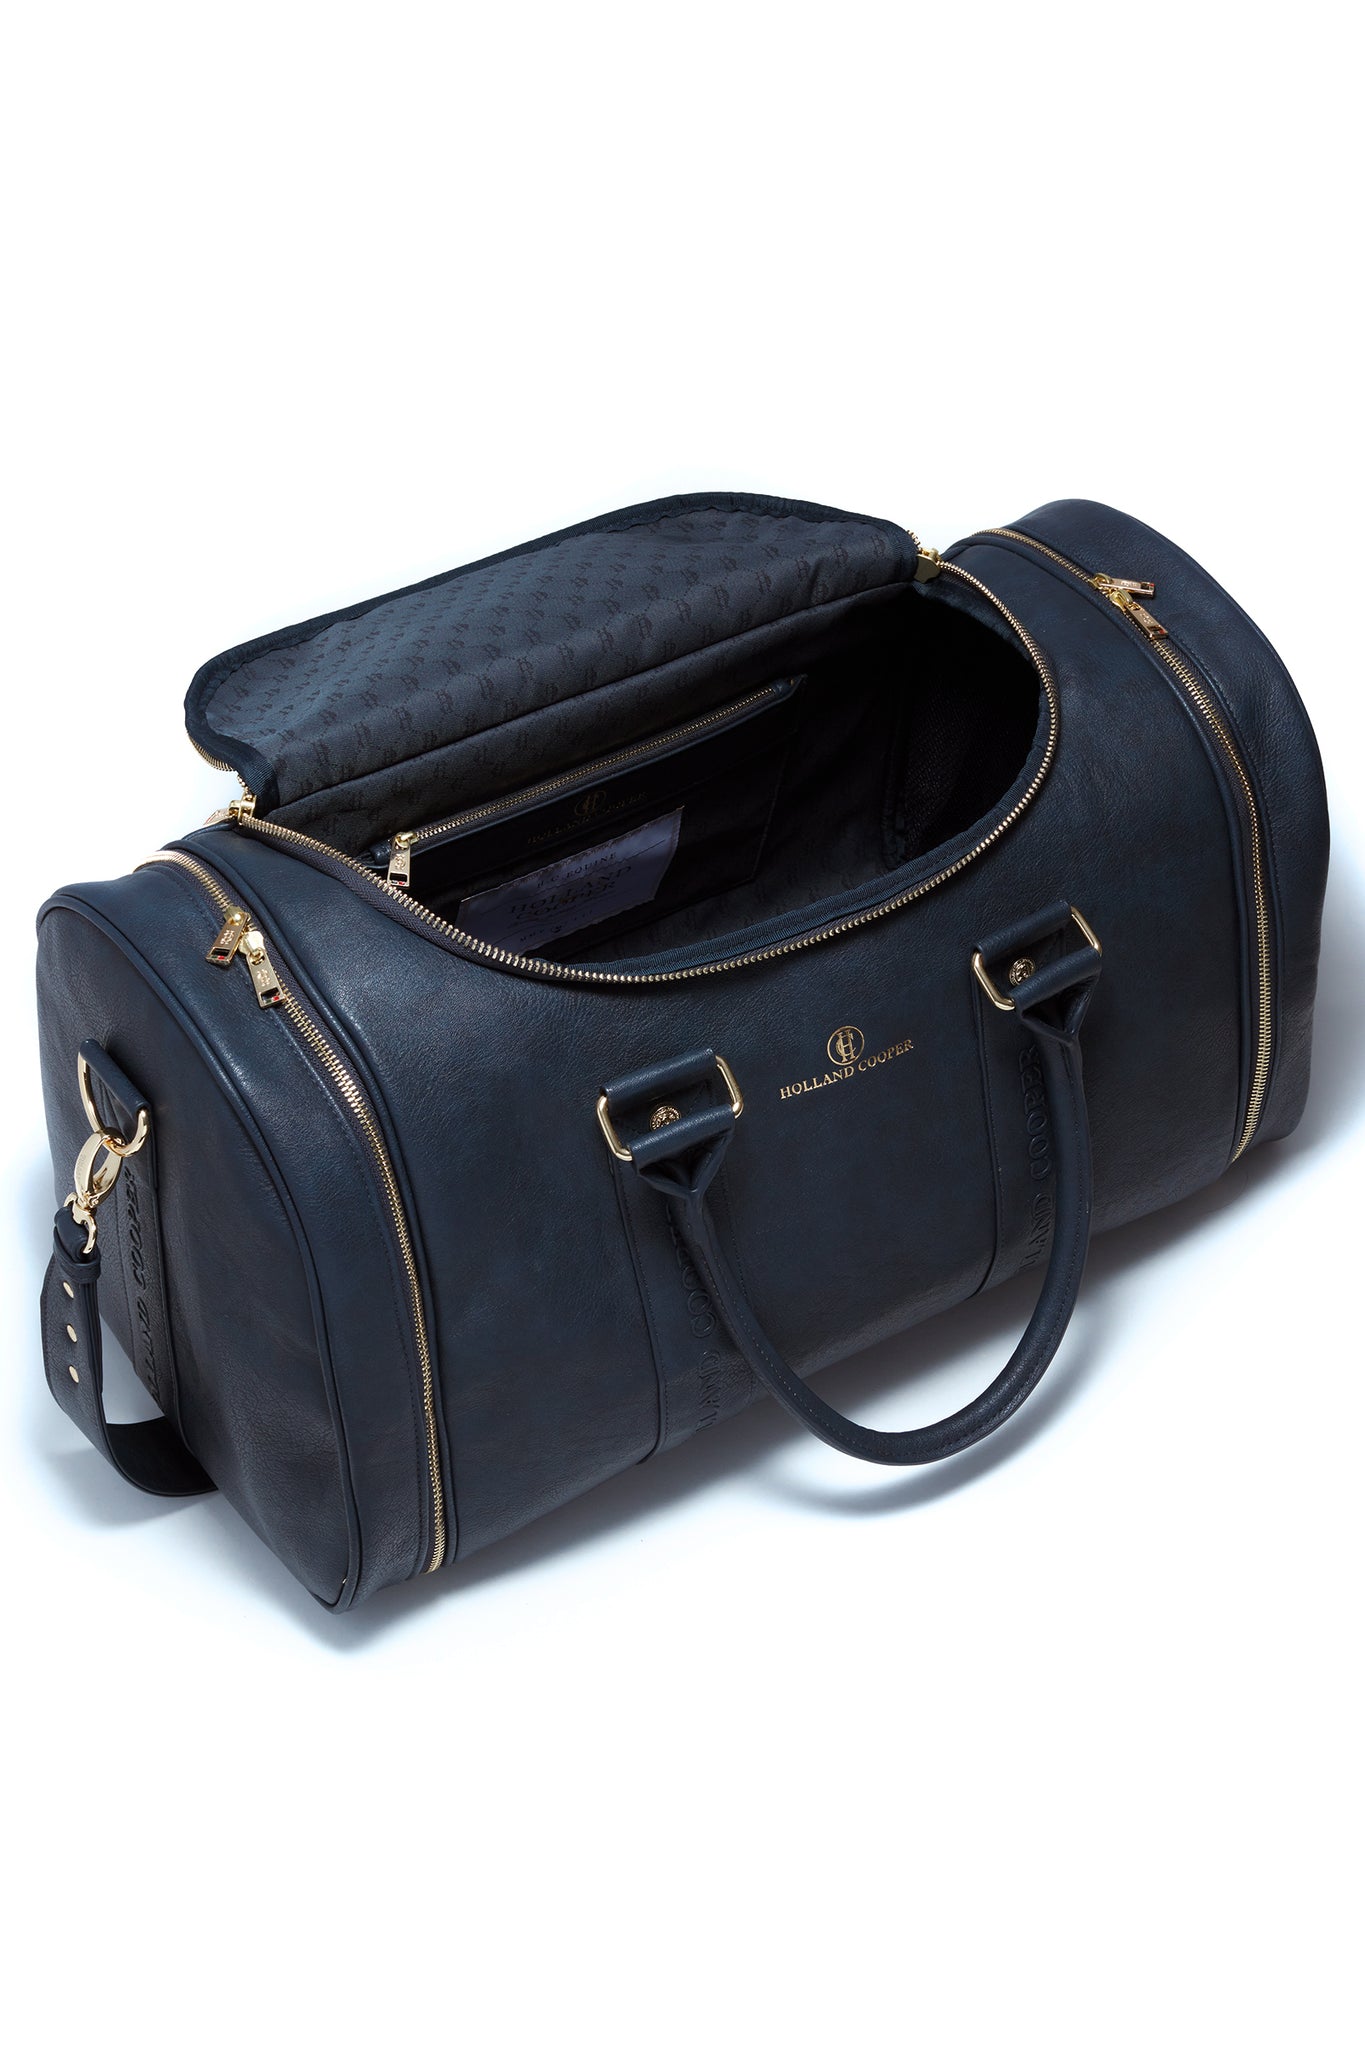 inside navy faux leather equestrian kit bag showing the navy monogram lining and internal zip pocket